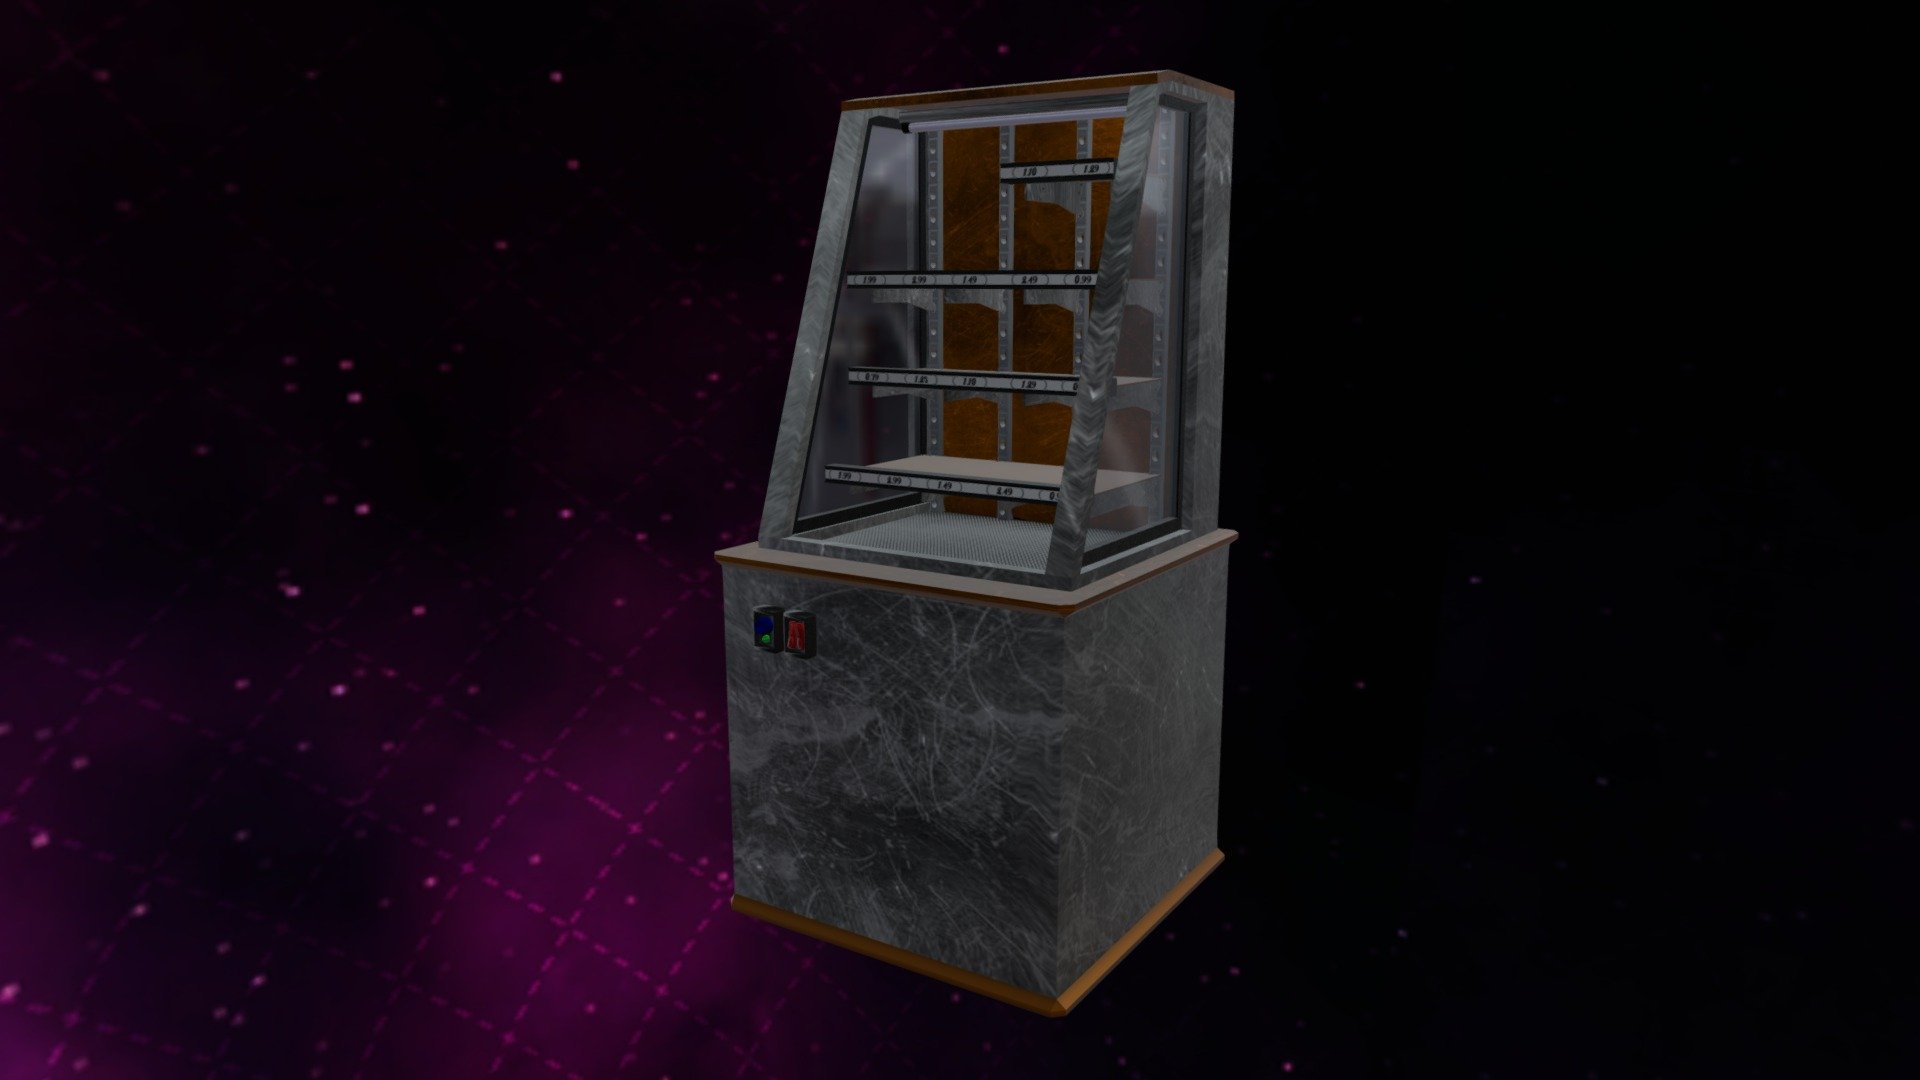 Introducing the Refrigerator Display made by ACBRadio, the programs used to make this object are as follows: Blender 2.92.0 &amp; G.I.M.P 2.10.4…The ‘Textures’ inclued in this object are the following: Deffuse…Free of Charge

360 backdrop’s total poly count: Triangles: 4k Vertices: 2k 

Refrigerator Display: Triangles: 16.7k Vertices: 8.3k

:D - Refrigerator Display .Blend FREE Low Poly - Download Free 3D model by LordSamueliSolo (@LadyLionStudios) 3d model